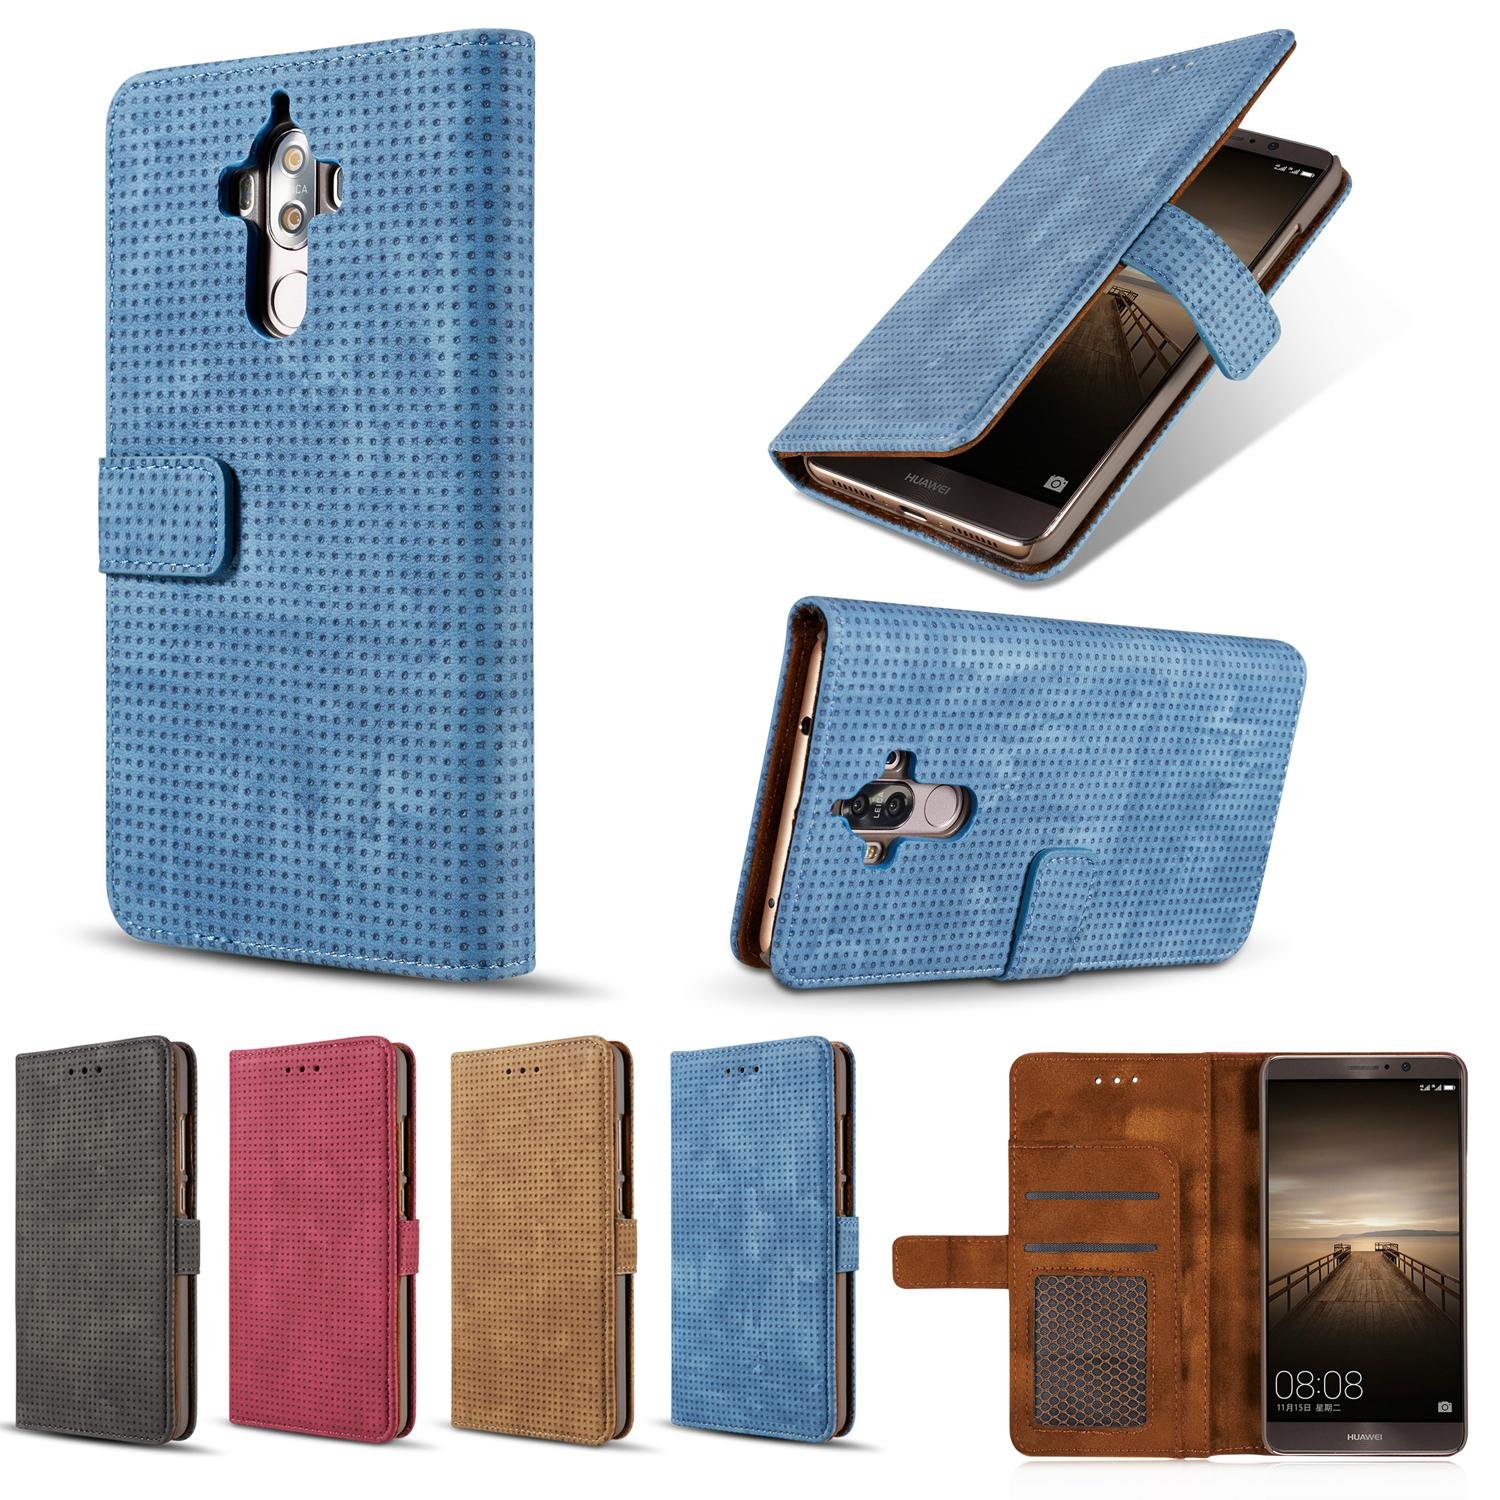 Genuine Leather Magnetic Flip Card Wallet Cover Case For Apple iPhone 6 7 Plus 5